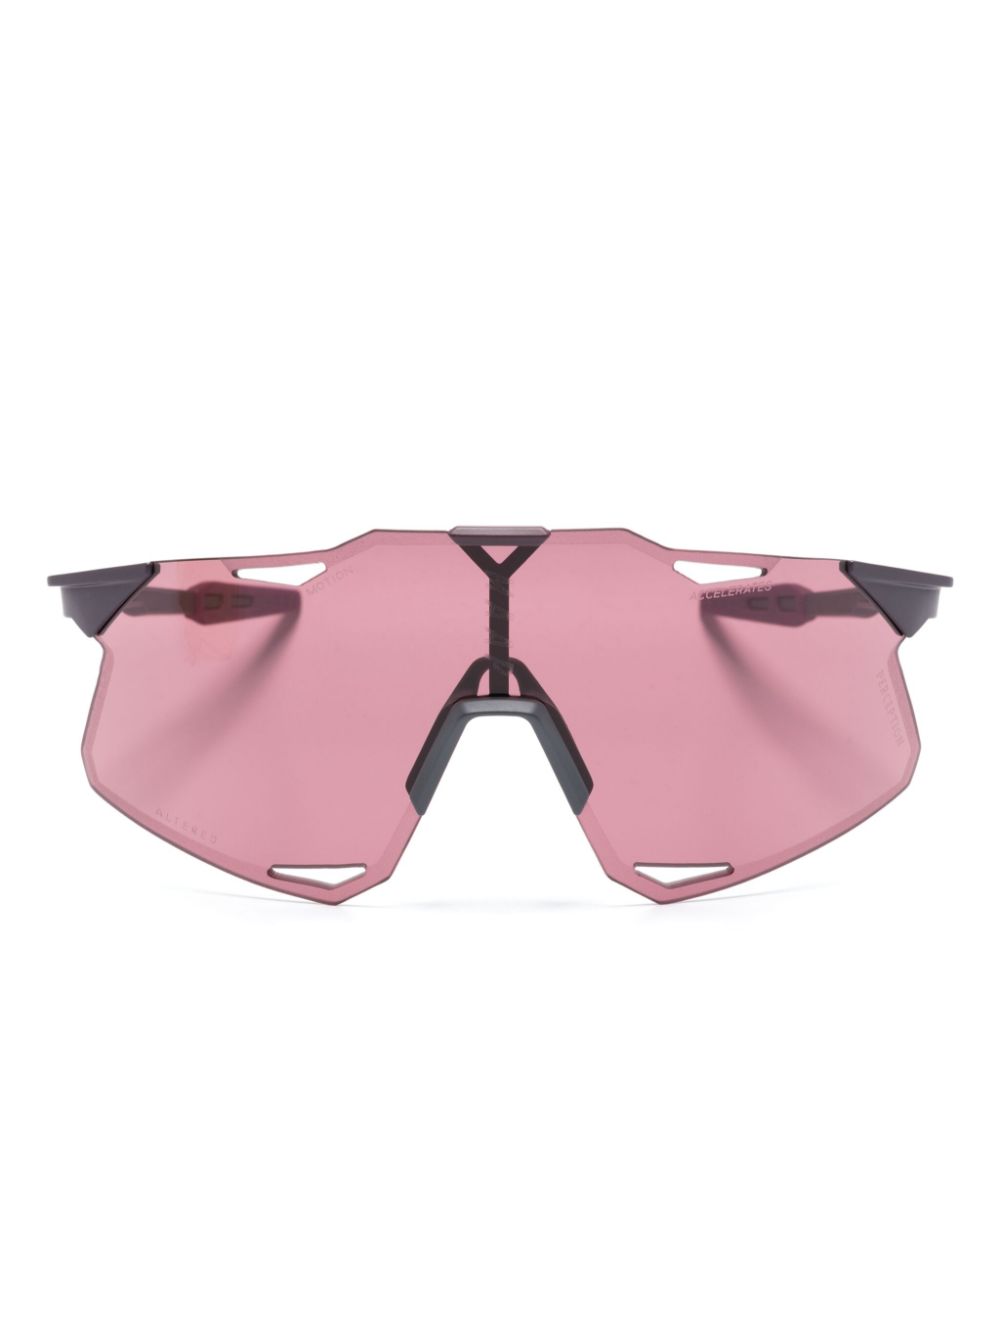 Pink tinted lens sunglasses